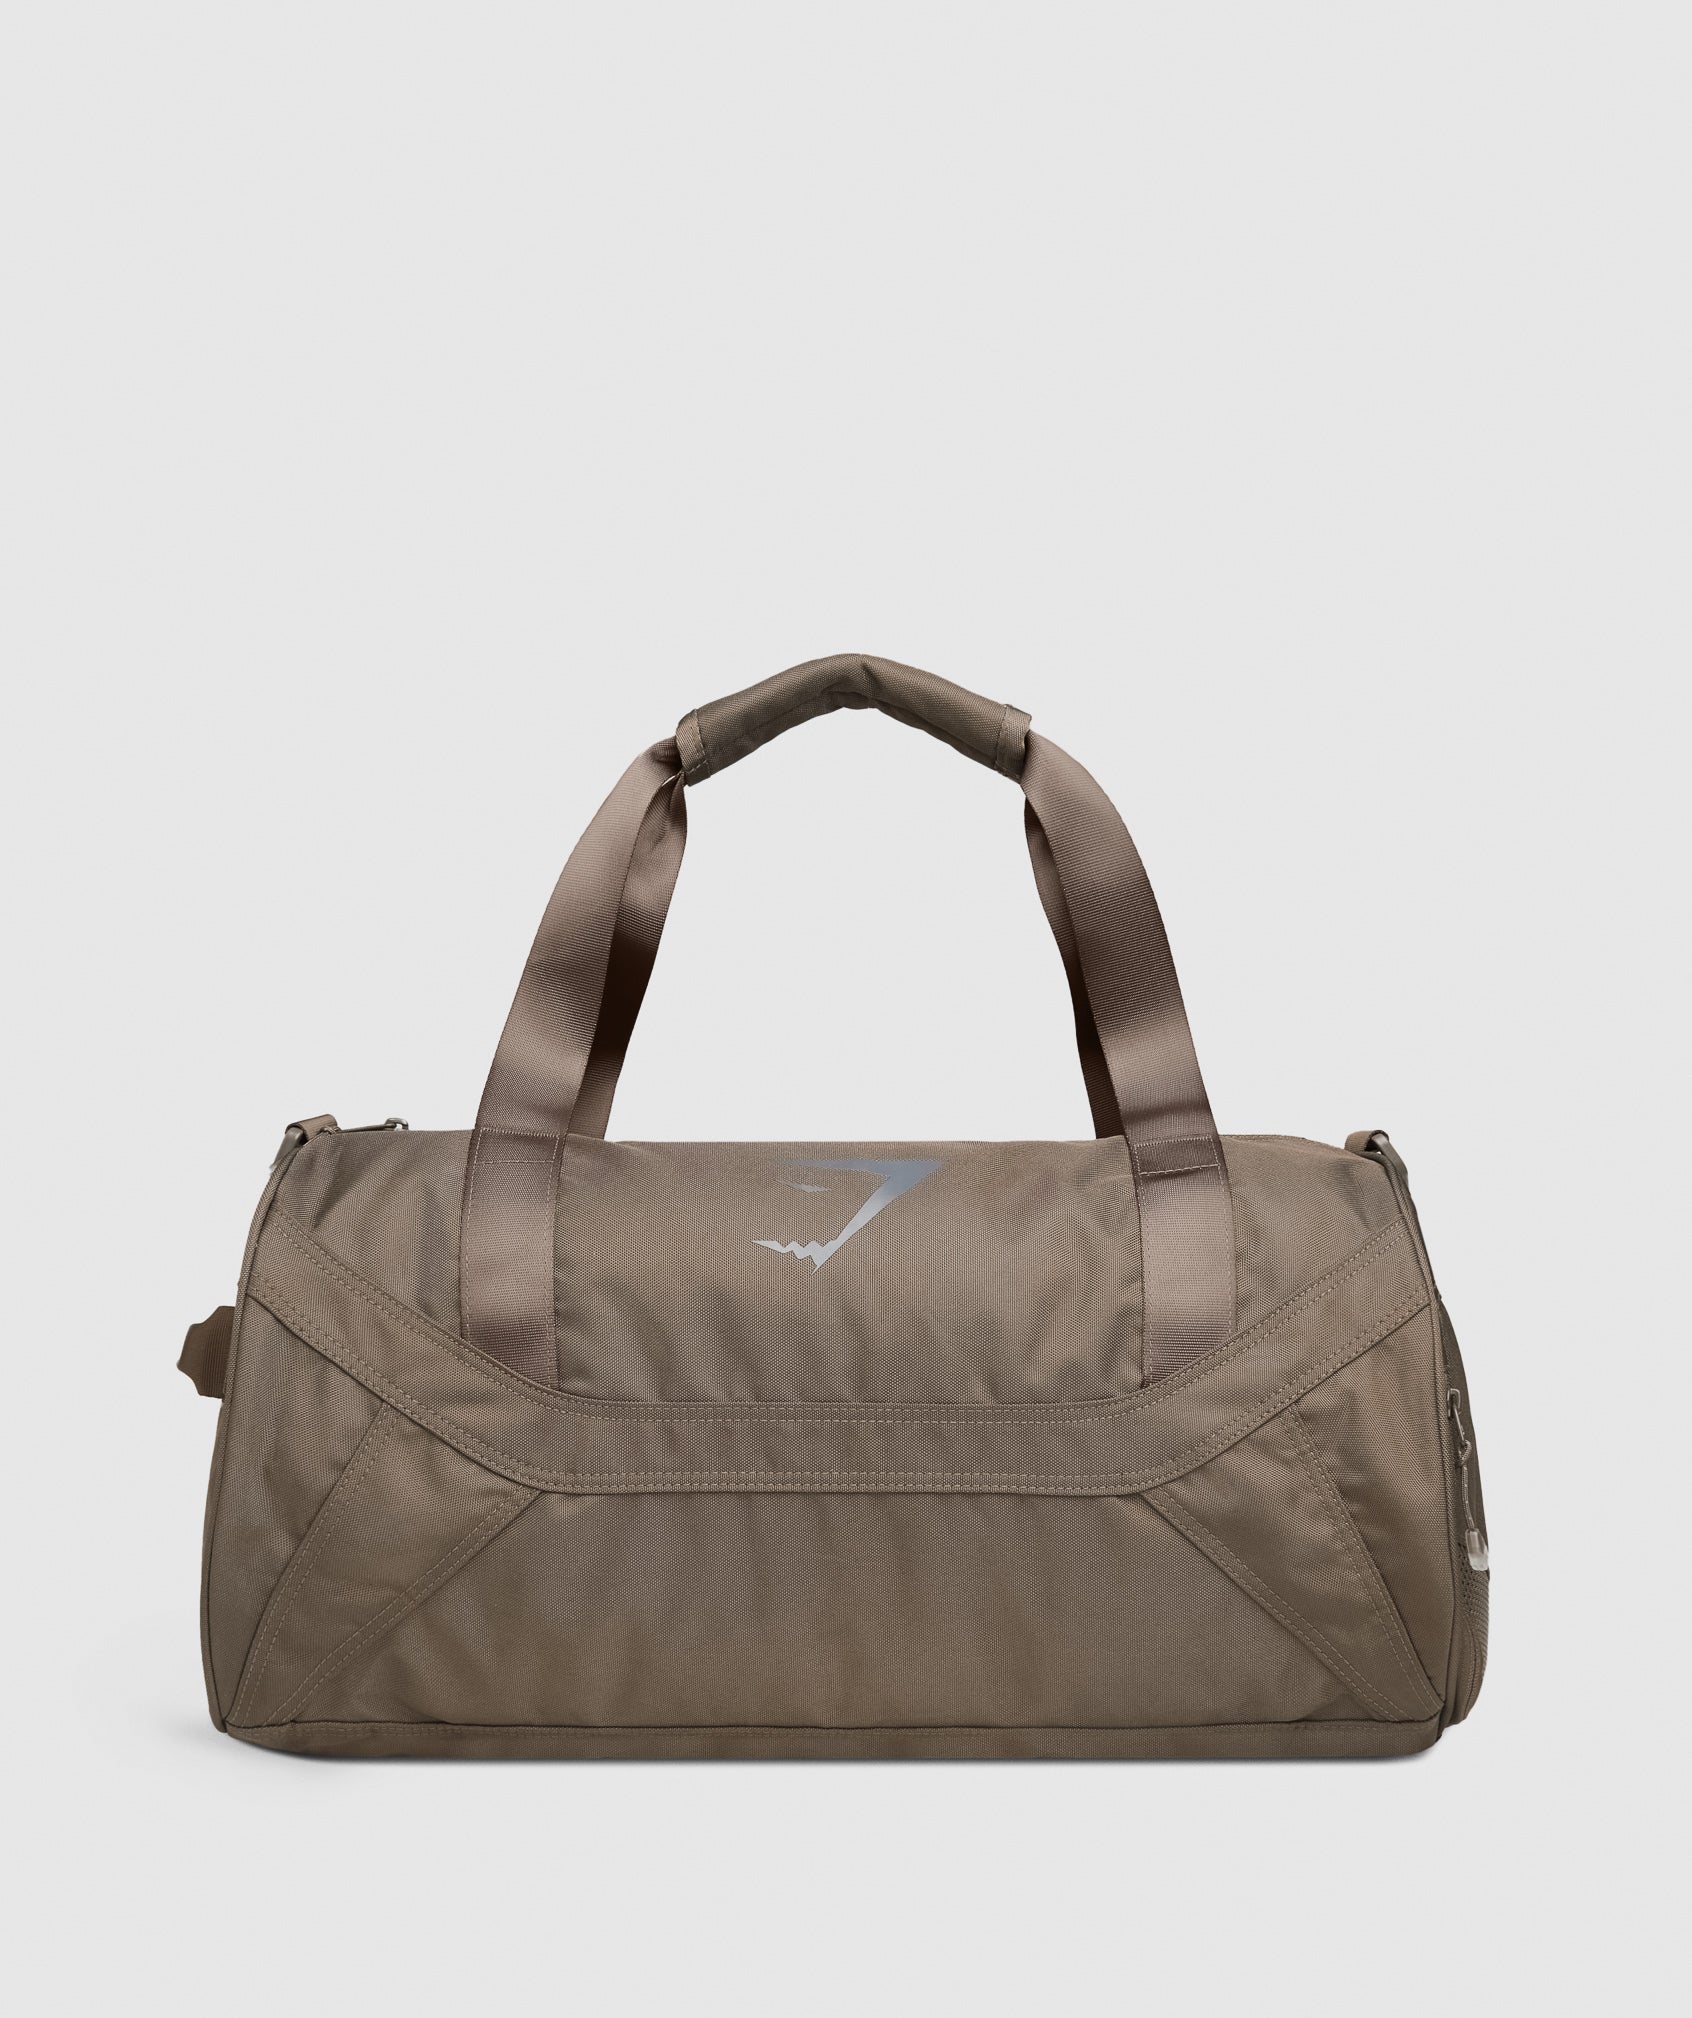 Sharkhead Holdall in Camo Brown - view 6